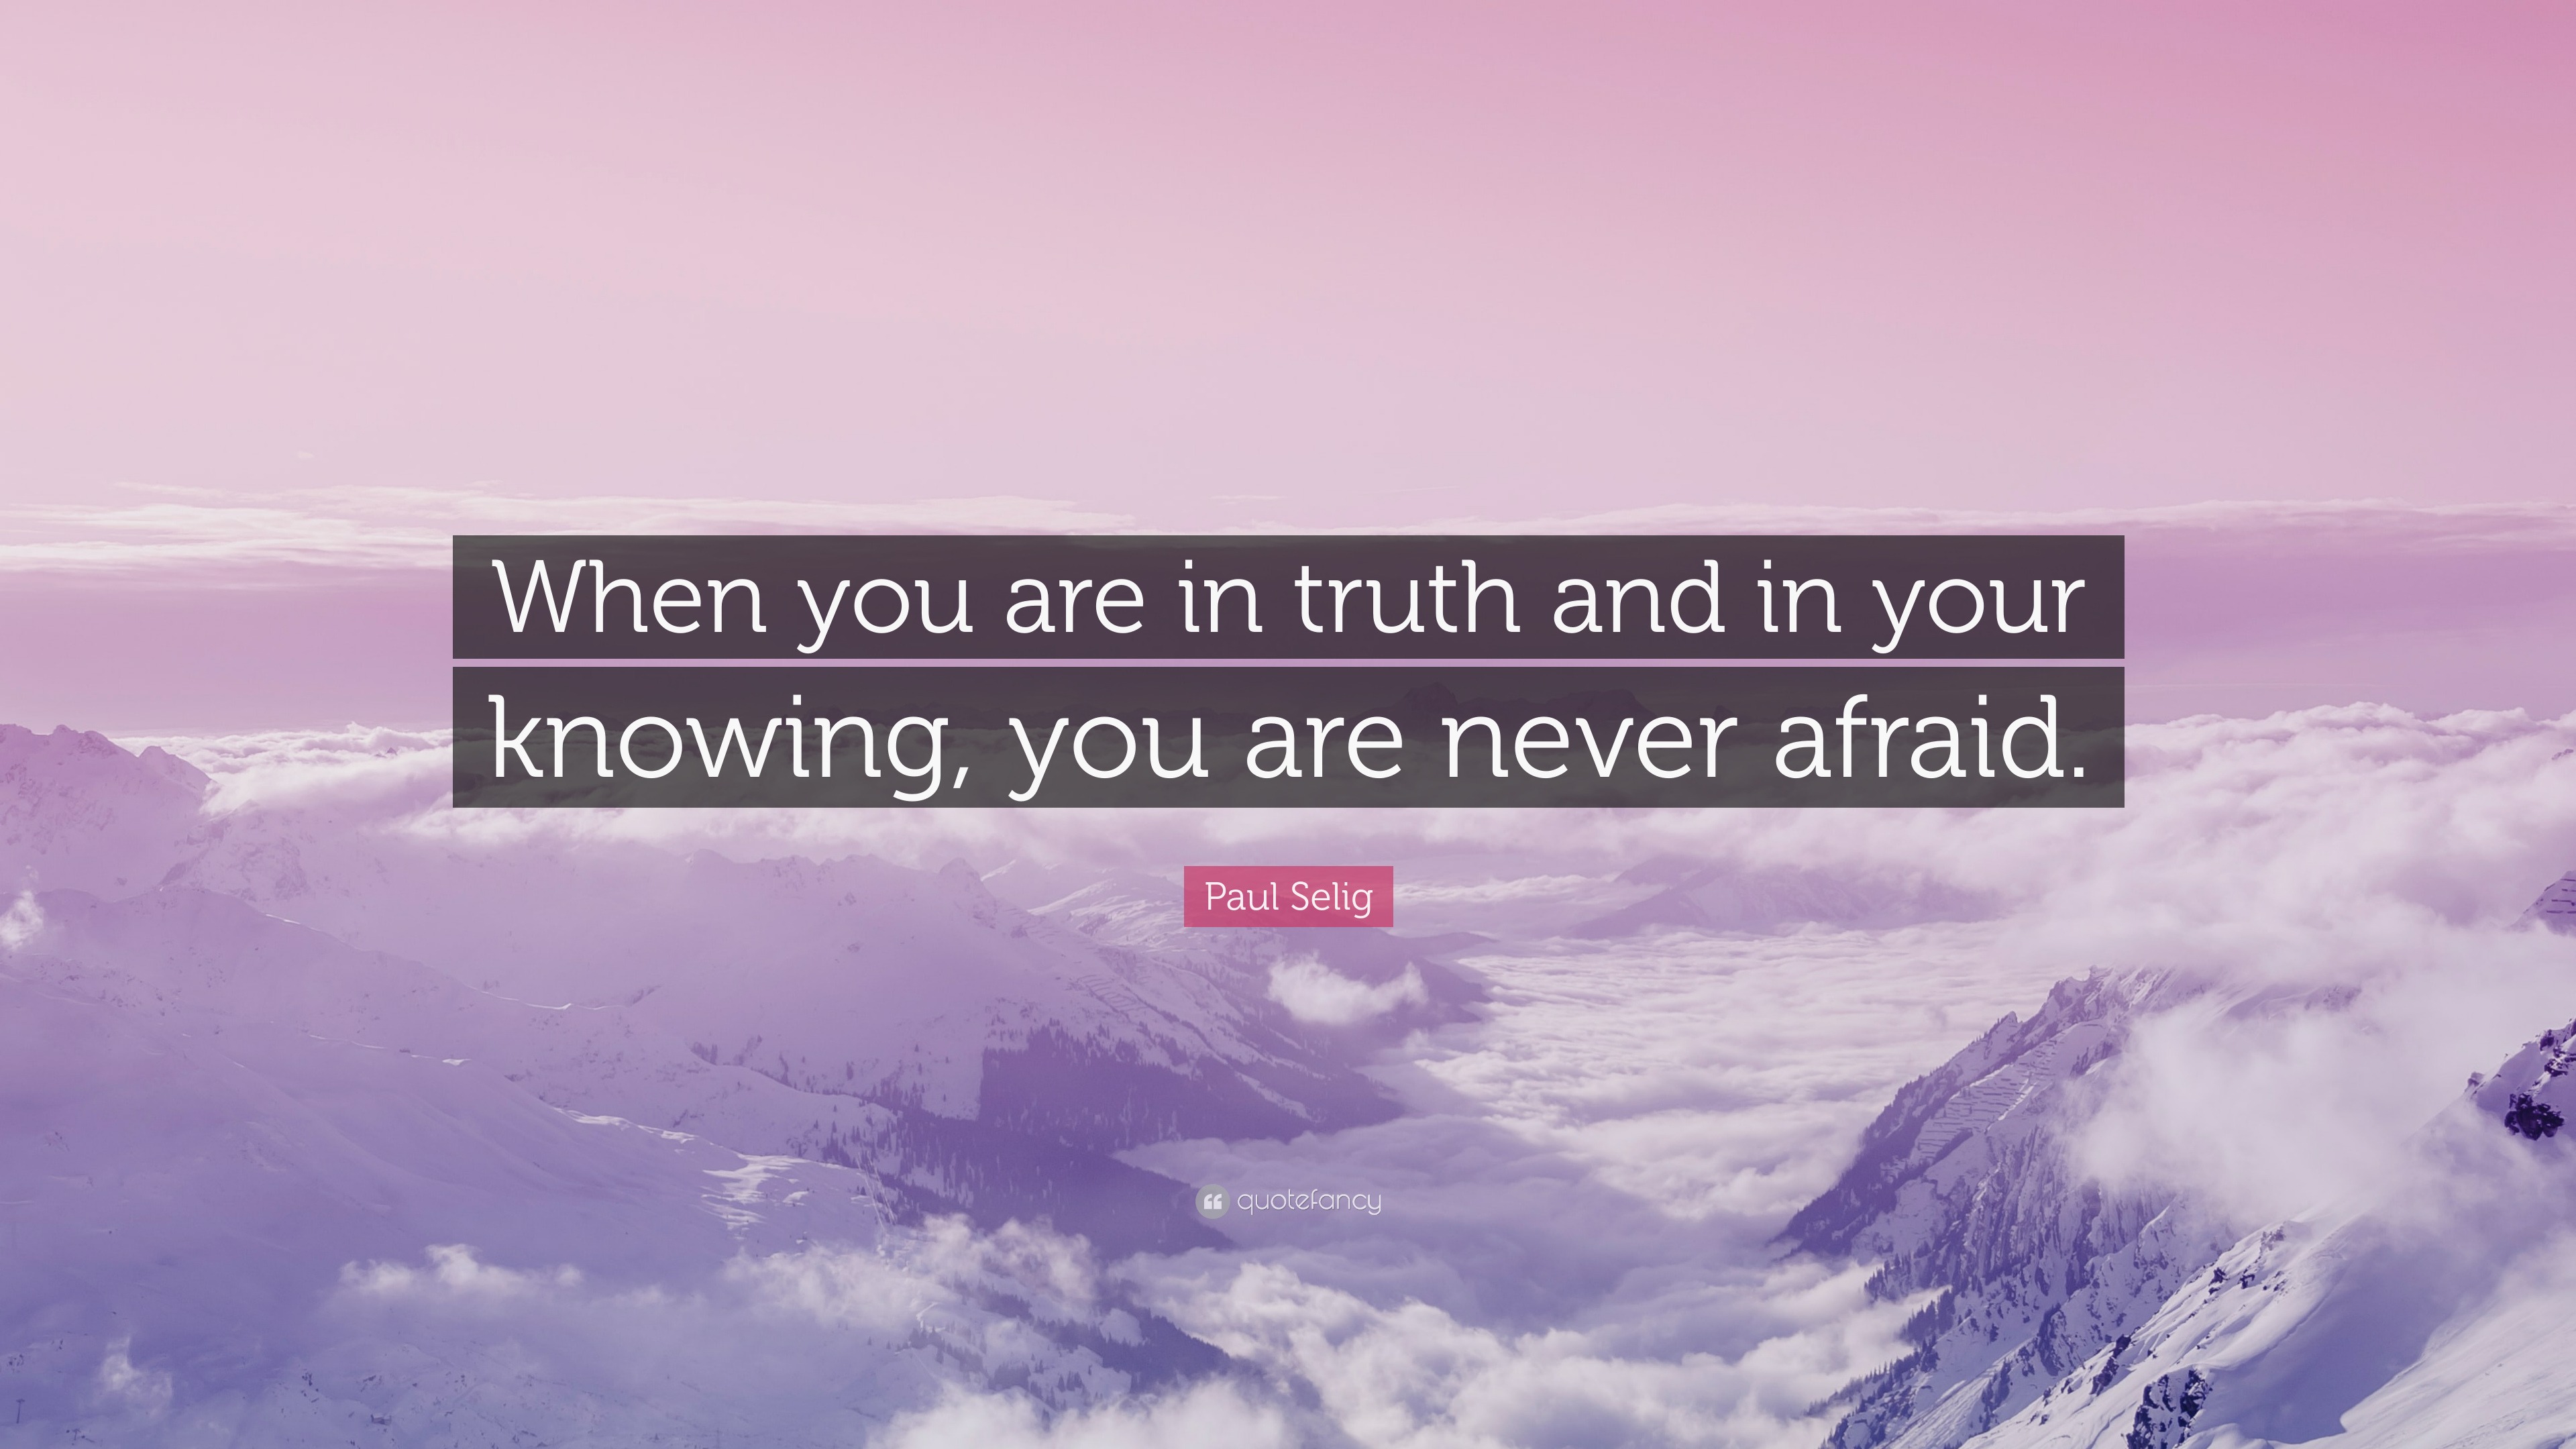 Paul Selig Quote “When you are in truth and in your knowing, you are